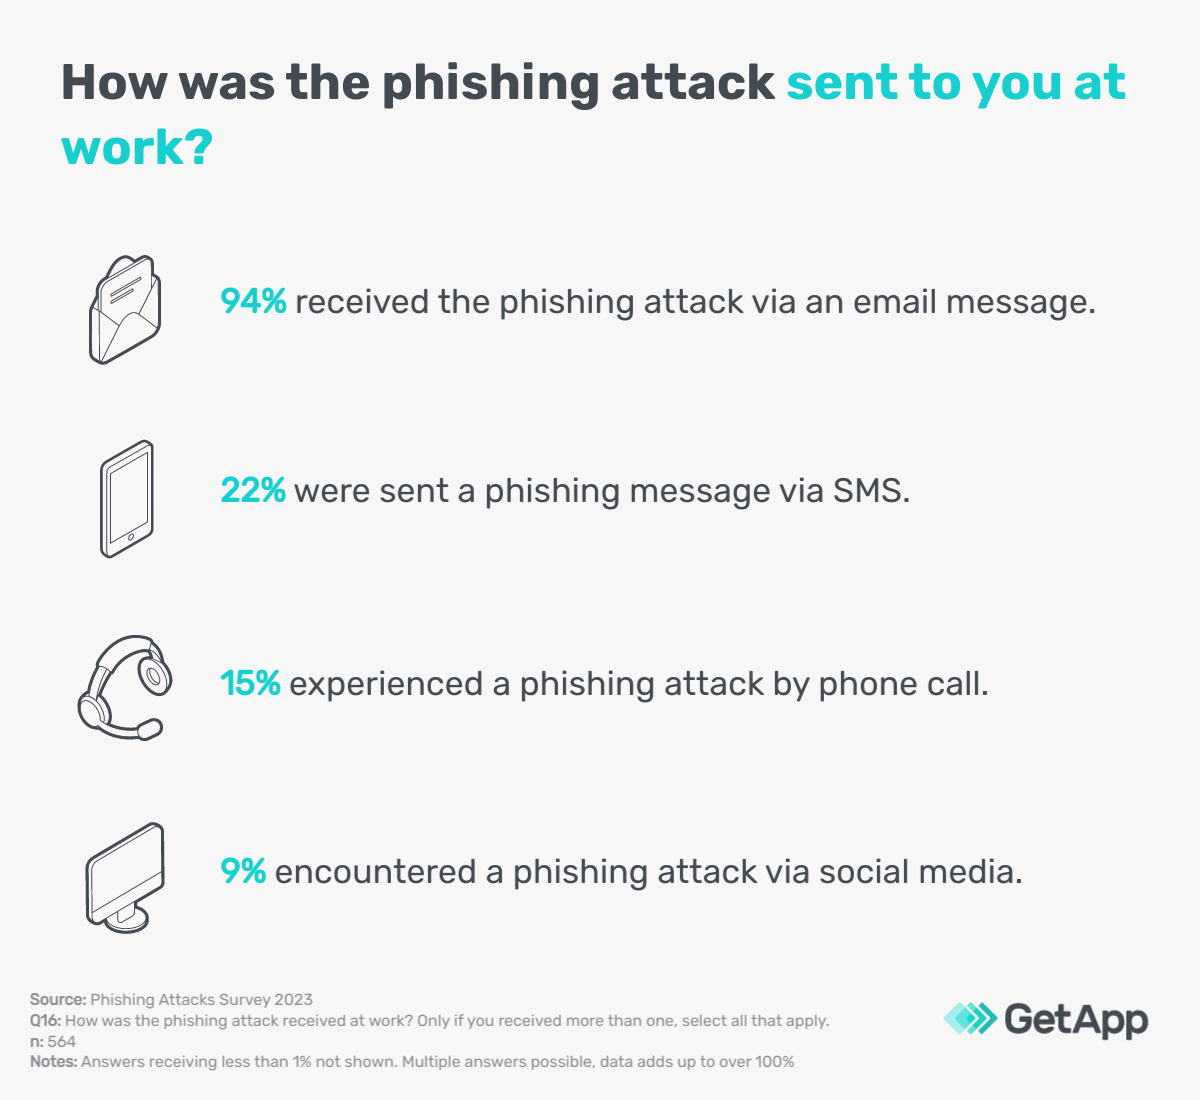 Phishing attacks received by media formats